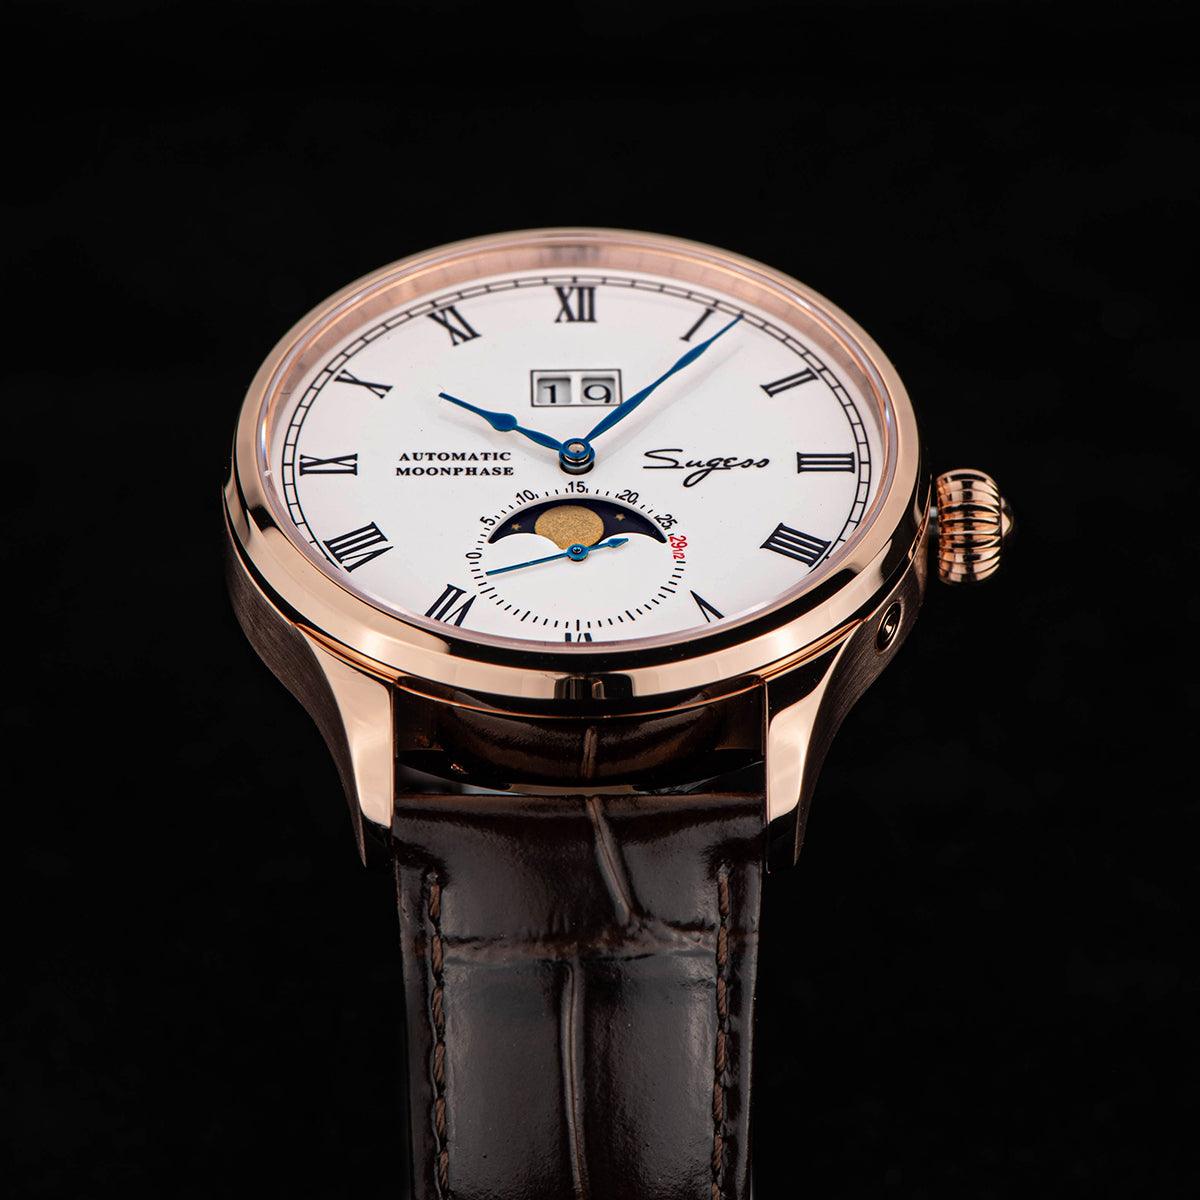 Sugess Automatic Moon Phase Men's Watch Gold Color Case with Seagull Movement, Business Elegance, and Enamel Dial - Murphy Johnson Watches Co.